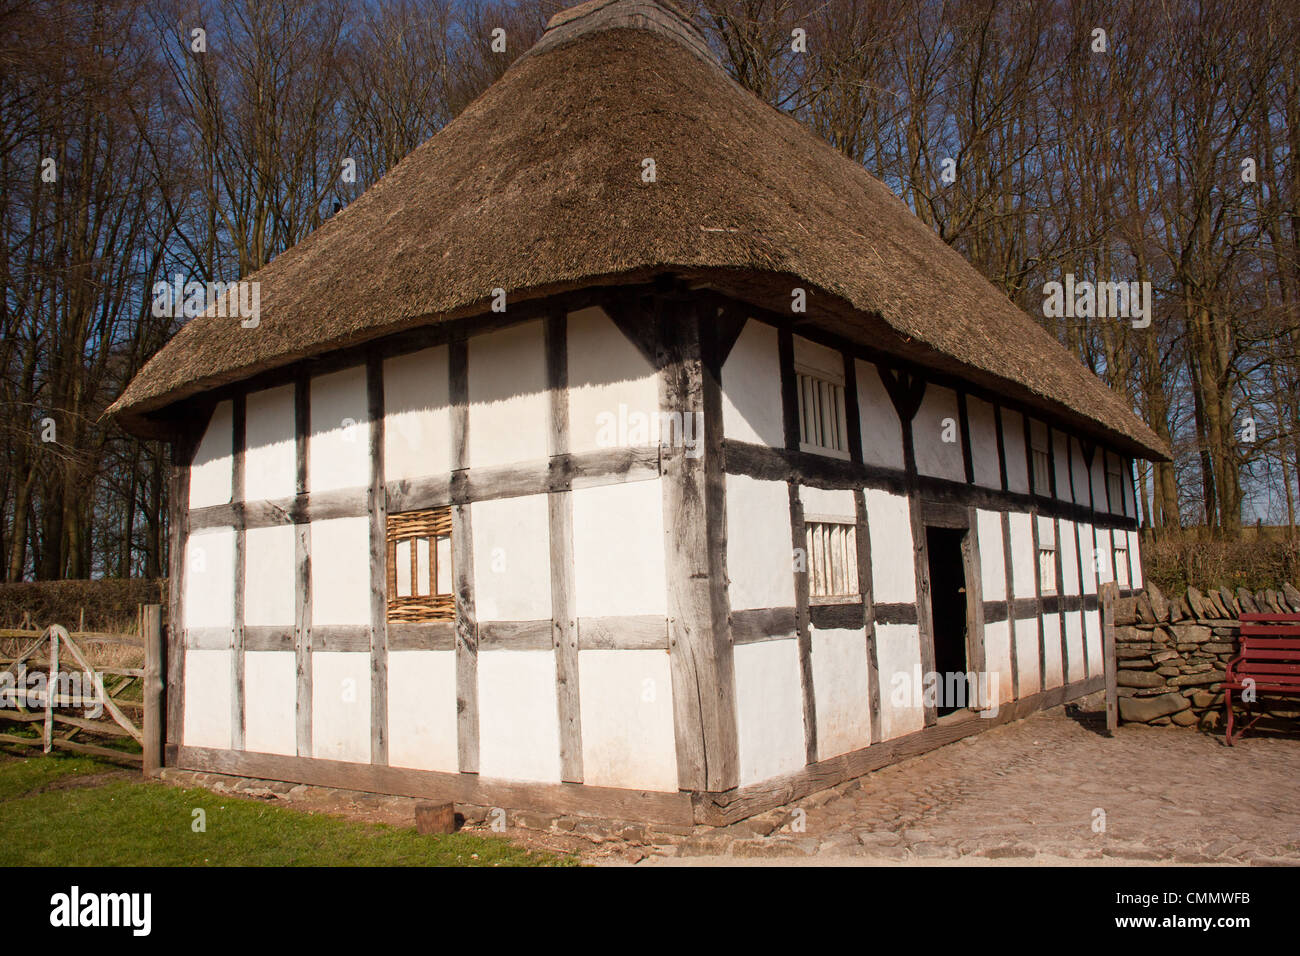 Thatched farm house originally built in 1678, timber framed construction, now sited at St Fagans national history museum. Stock Photo